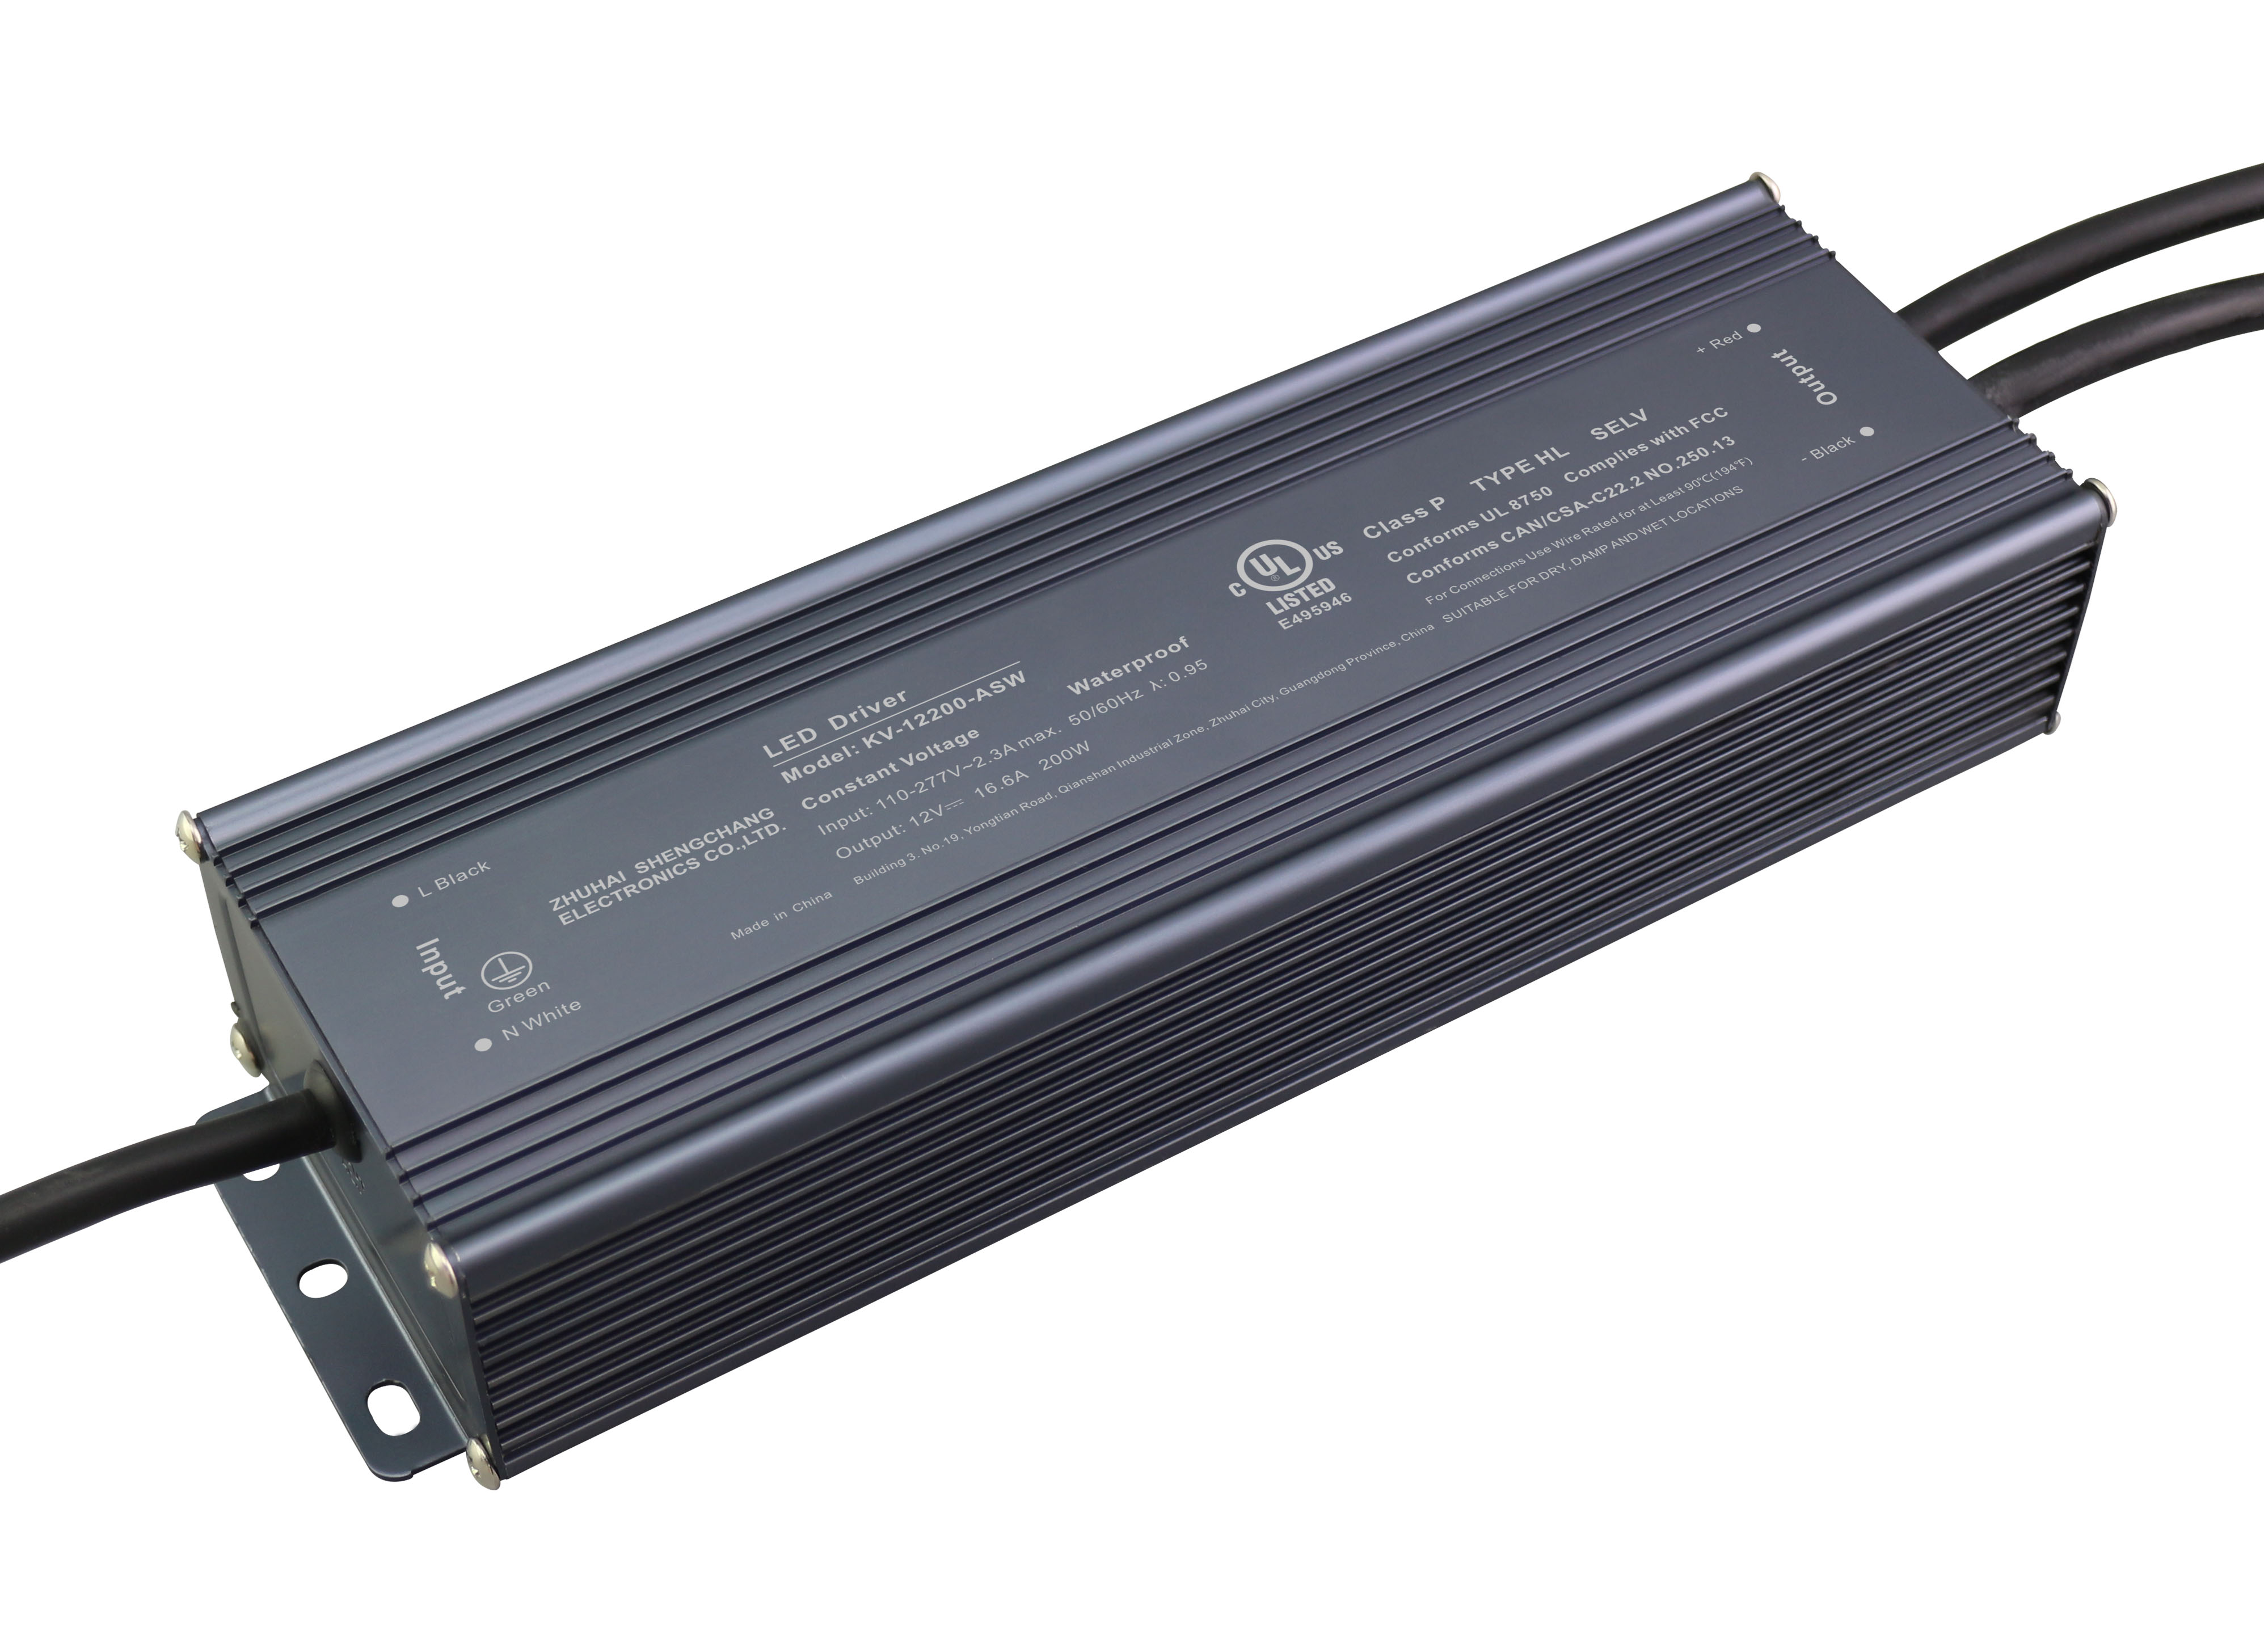 KV-ASW Series 120W Constant Voltage Non-Dimming LED Driver